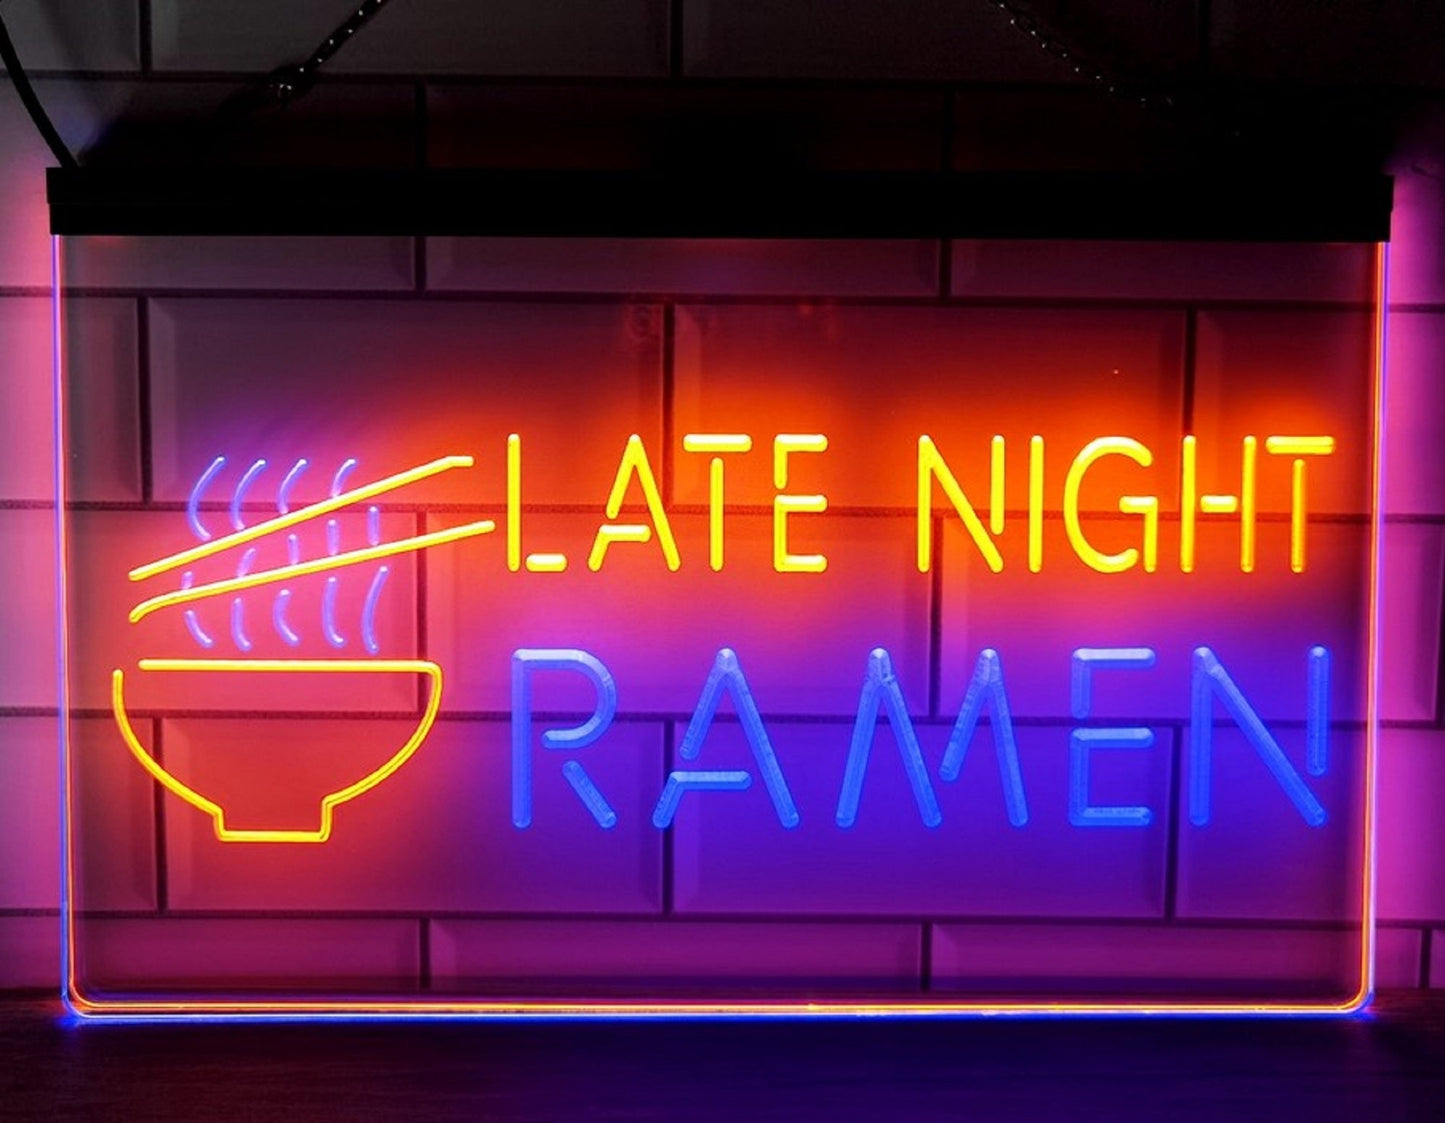 Neon Sign Dual Color Late Night Ramen For Japanese Restaurant Decor